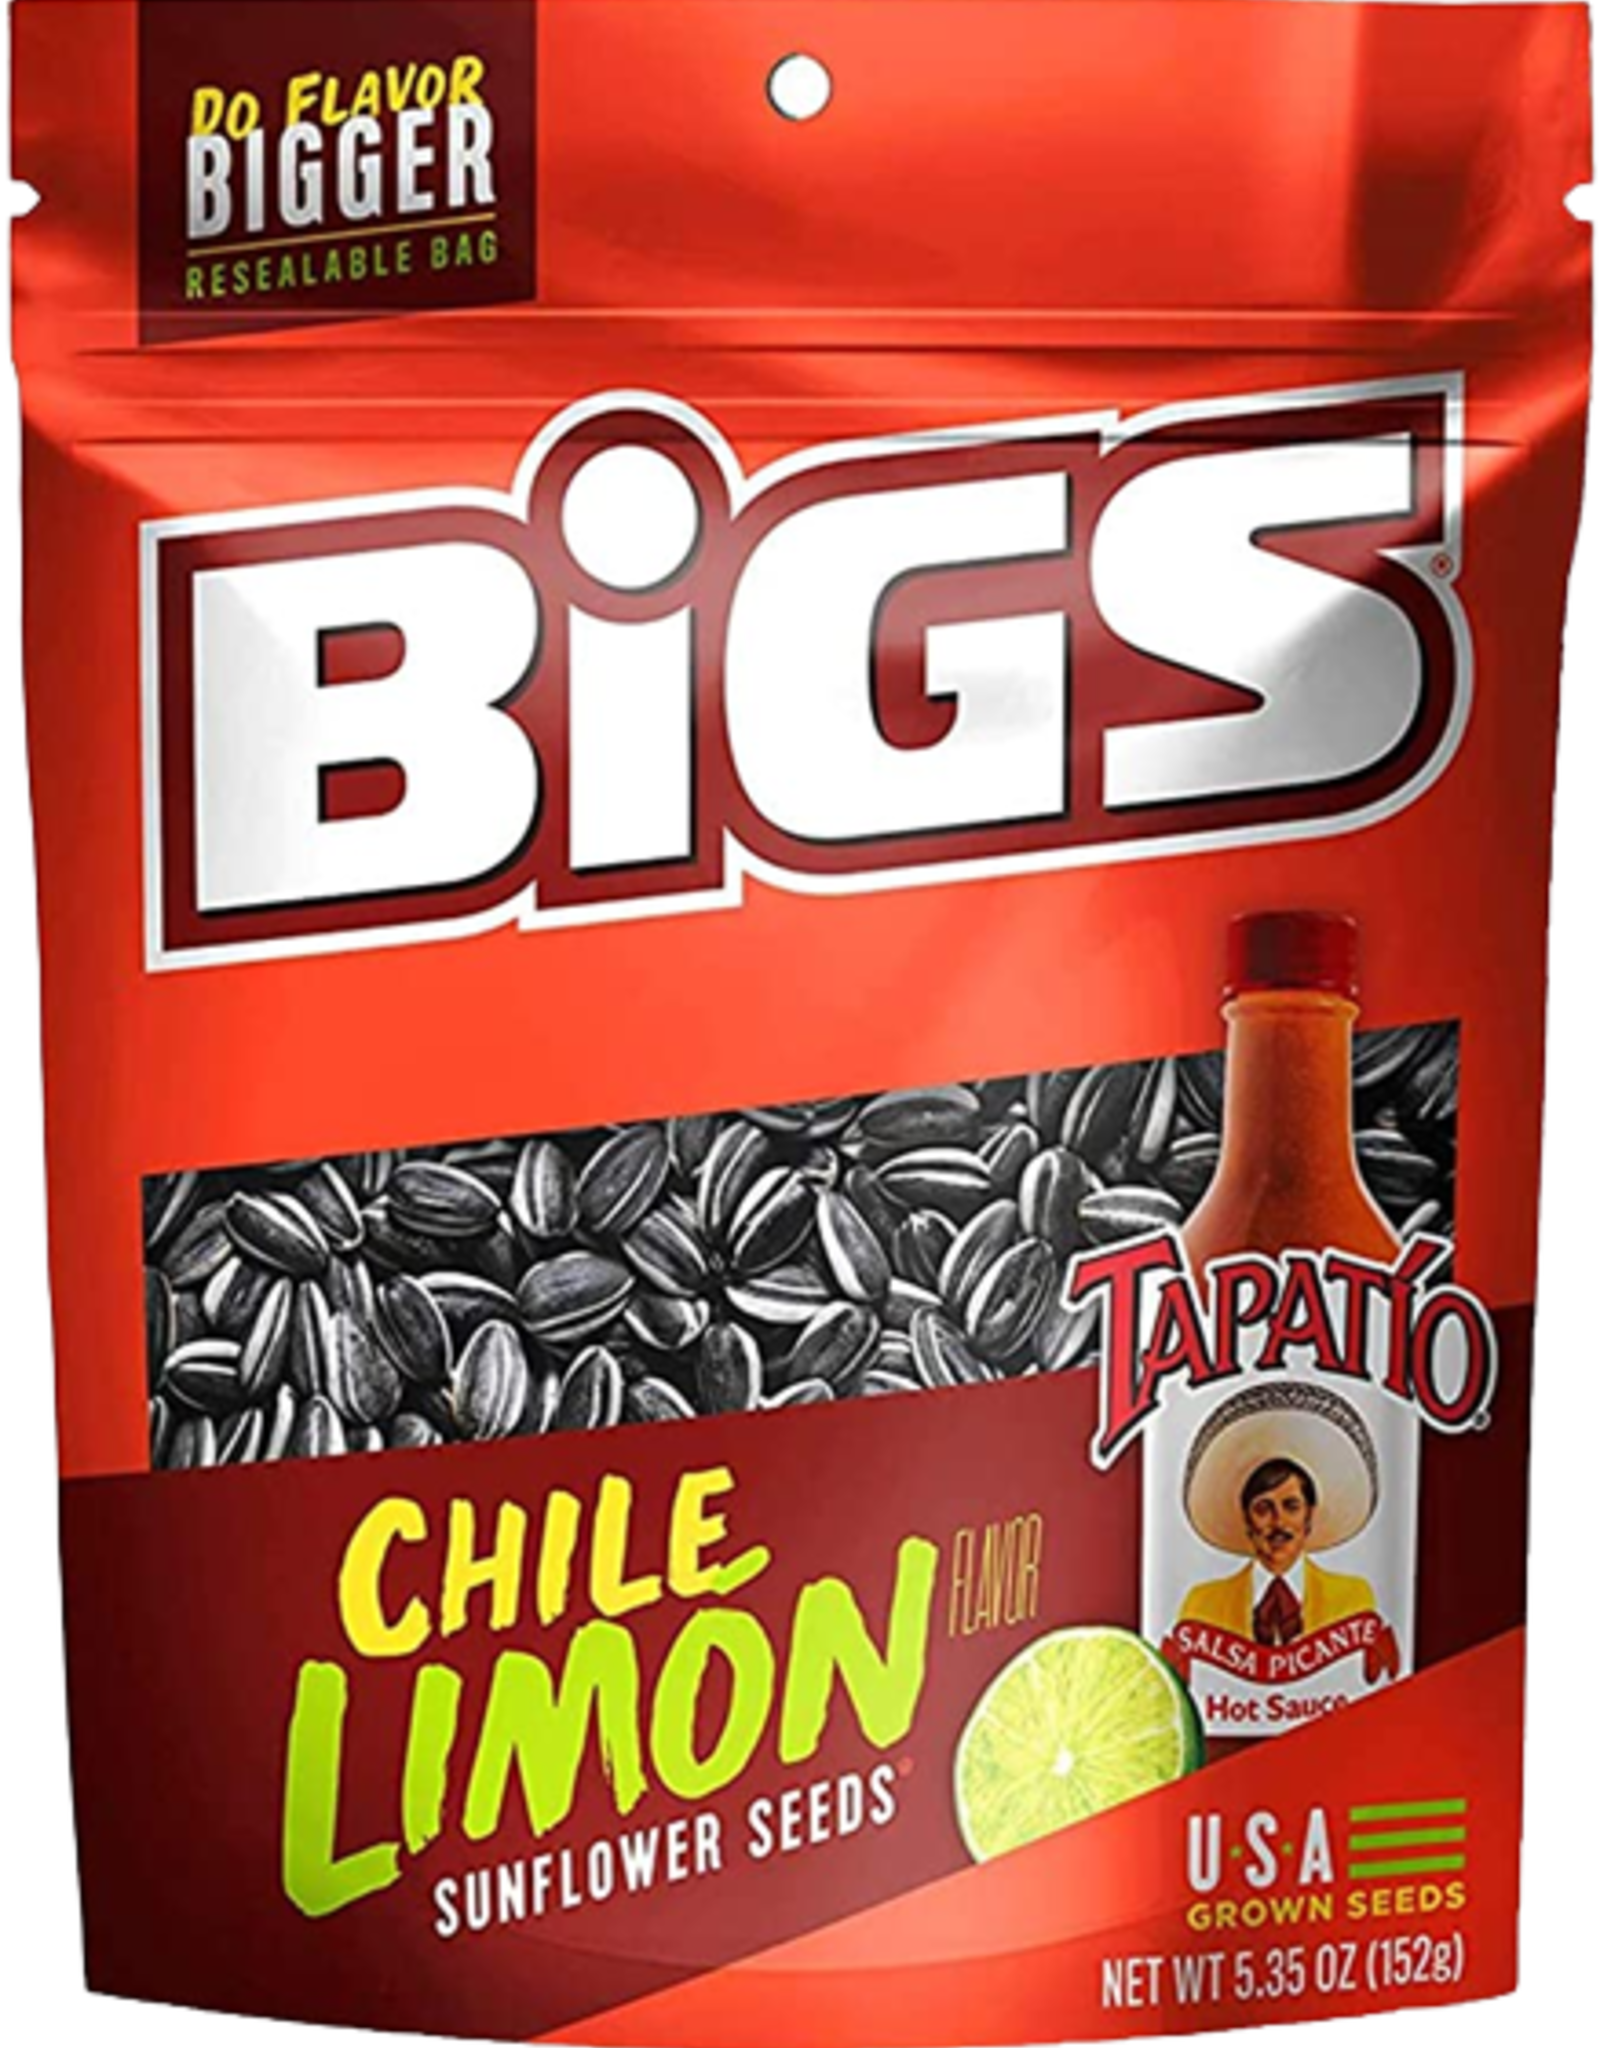 Bigs Sunflower Seeds Tapatio Chile Limon